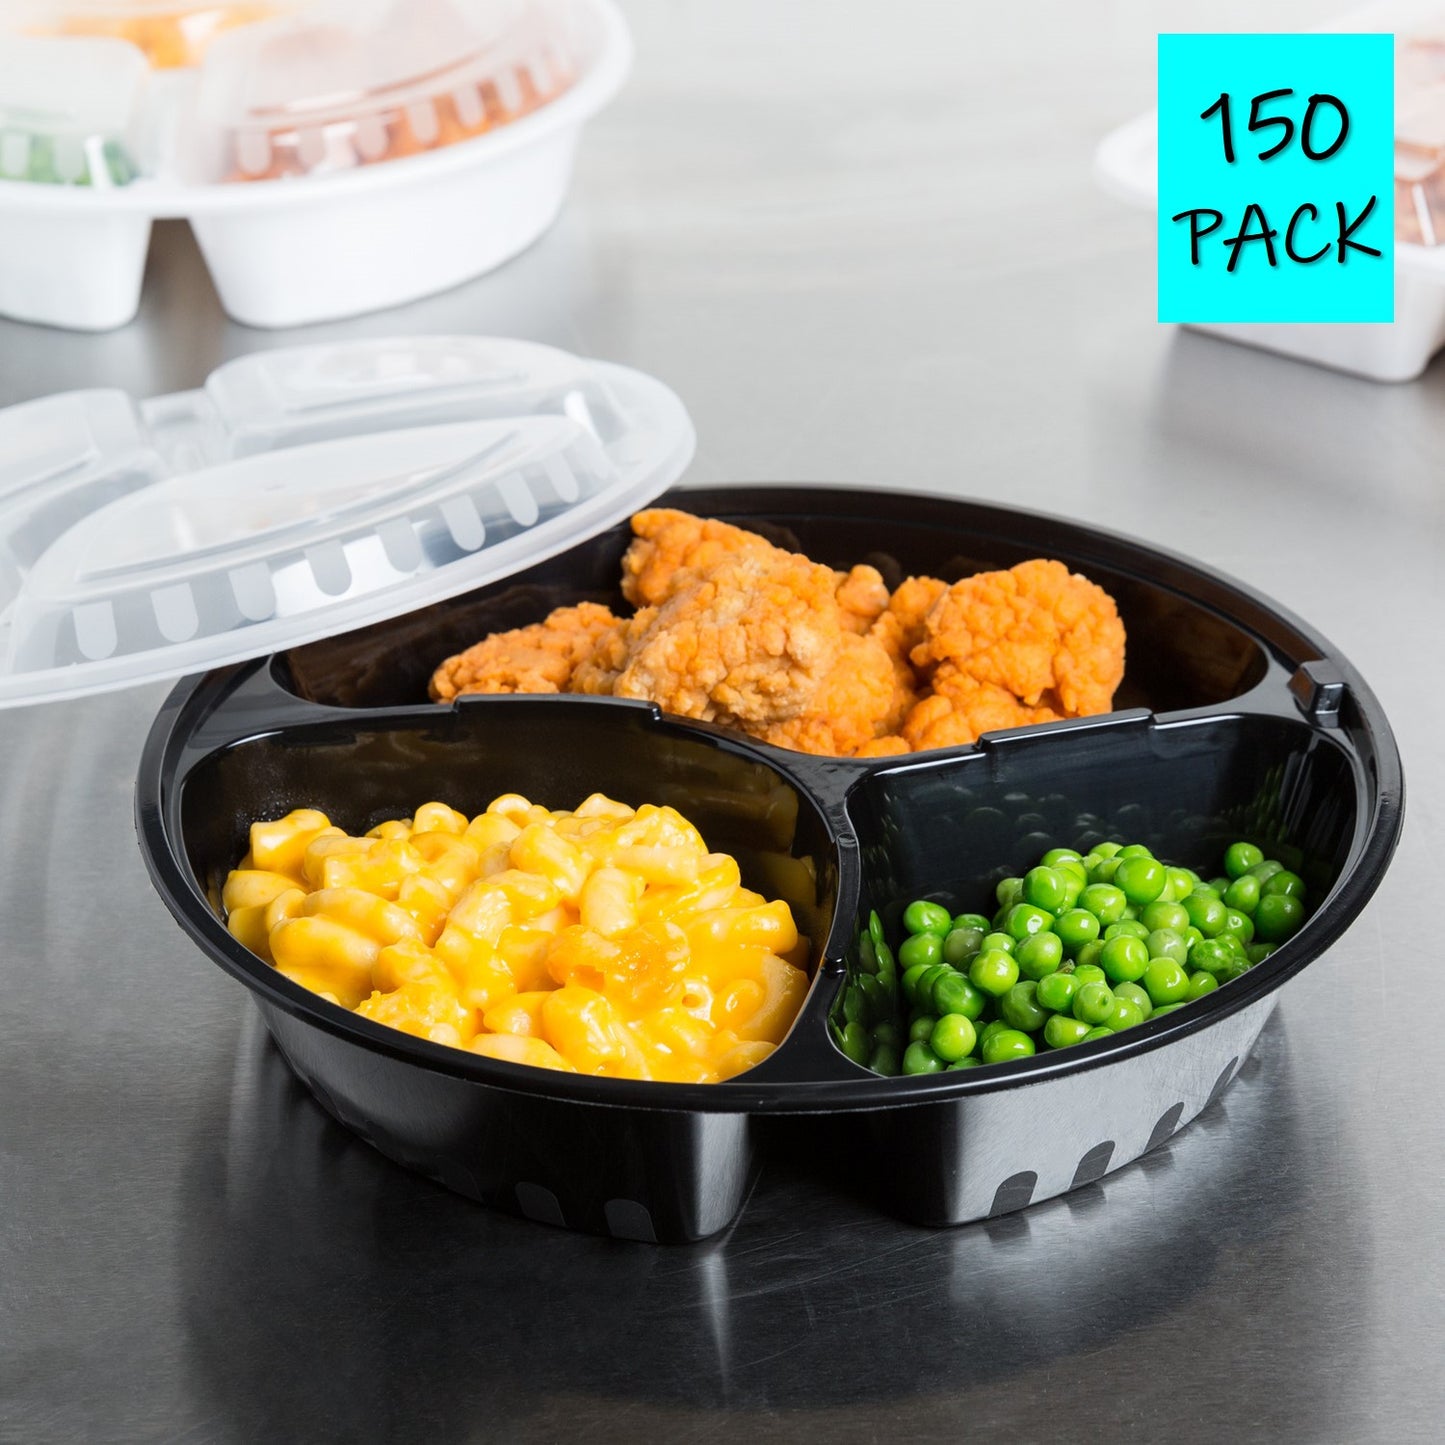 Take-Out Container 9" 39oz 3 Compartment With Lid Round Plastic Black 150 Pack